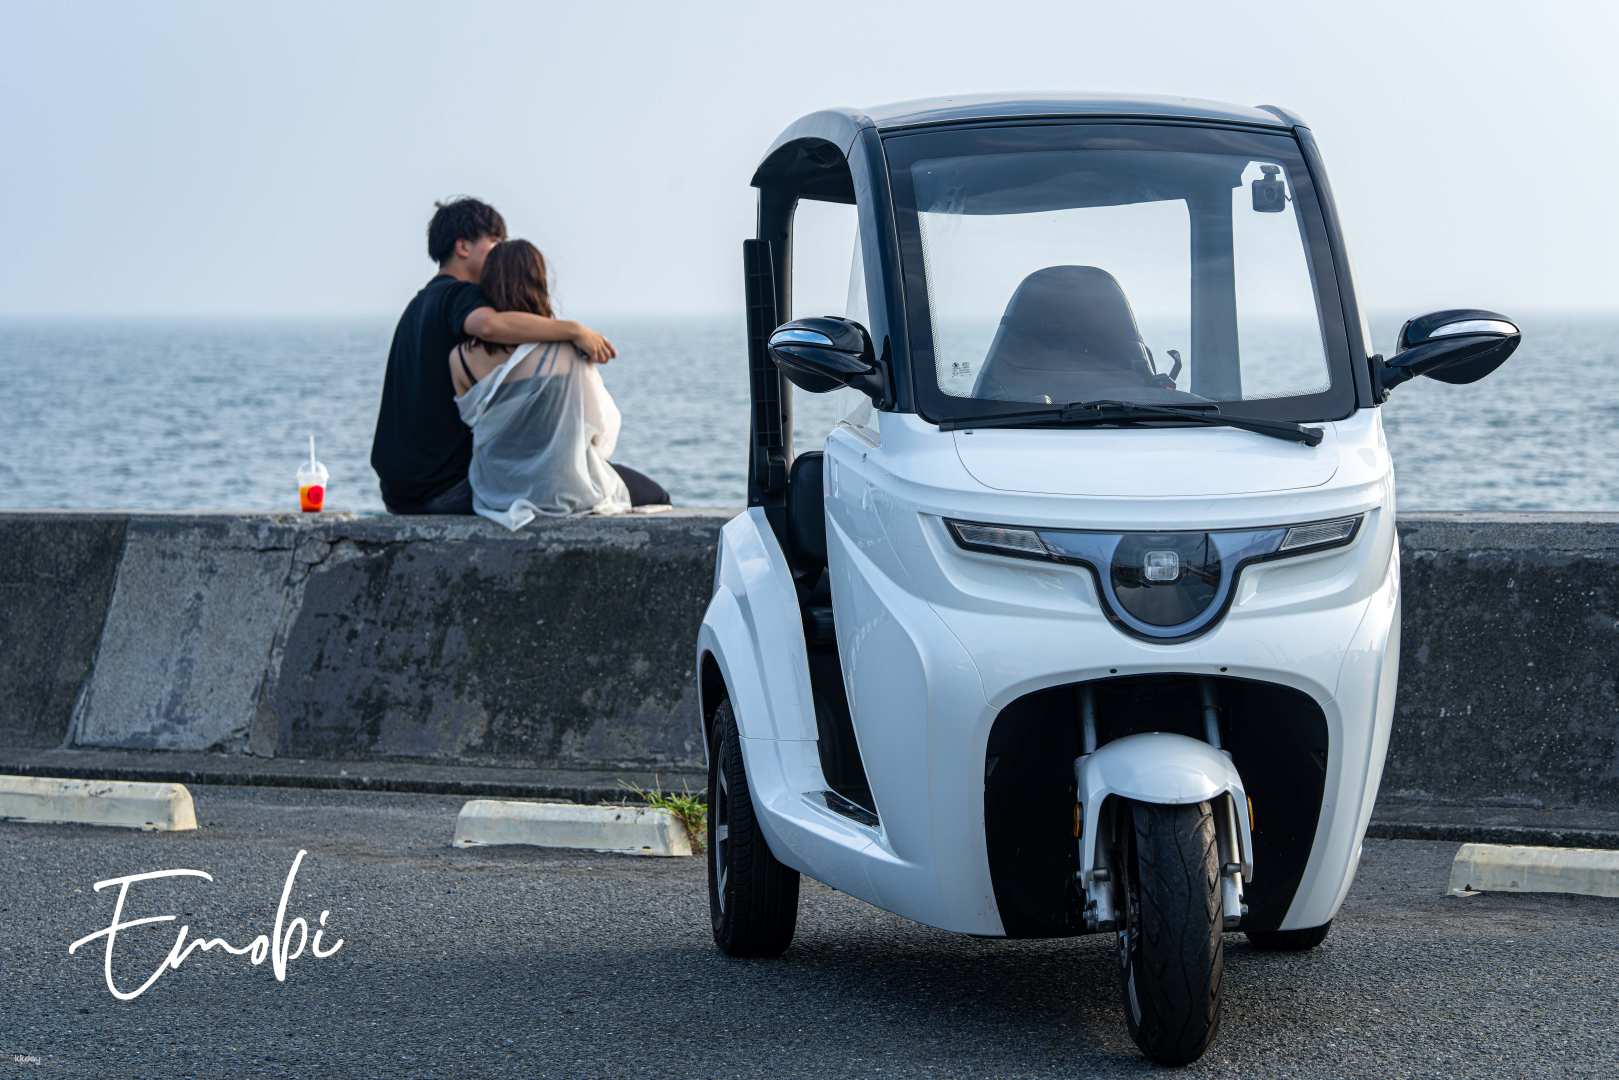 [Standard 5-hour course/driver’s license required] Electric tuk-tuk tour rental reservation Make travel fun and smart (Kamakura City, Kanagawa Prefecture, sightseeing)